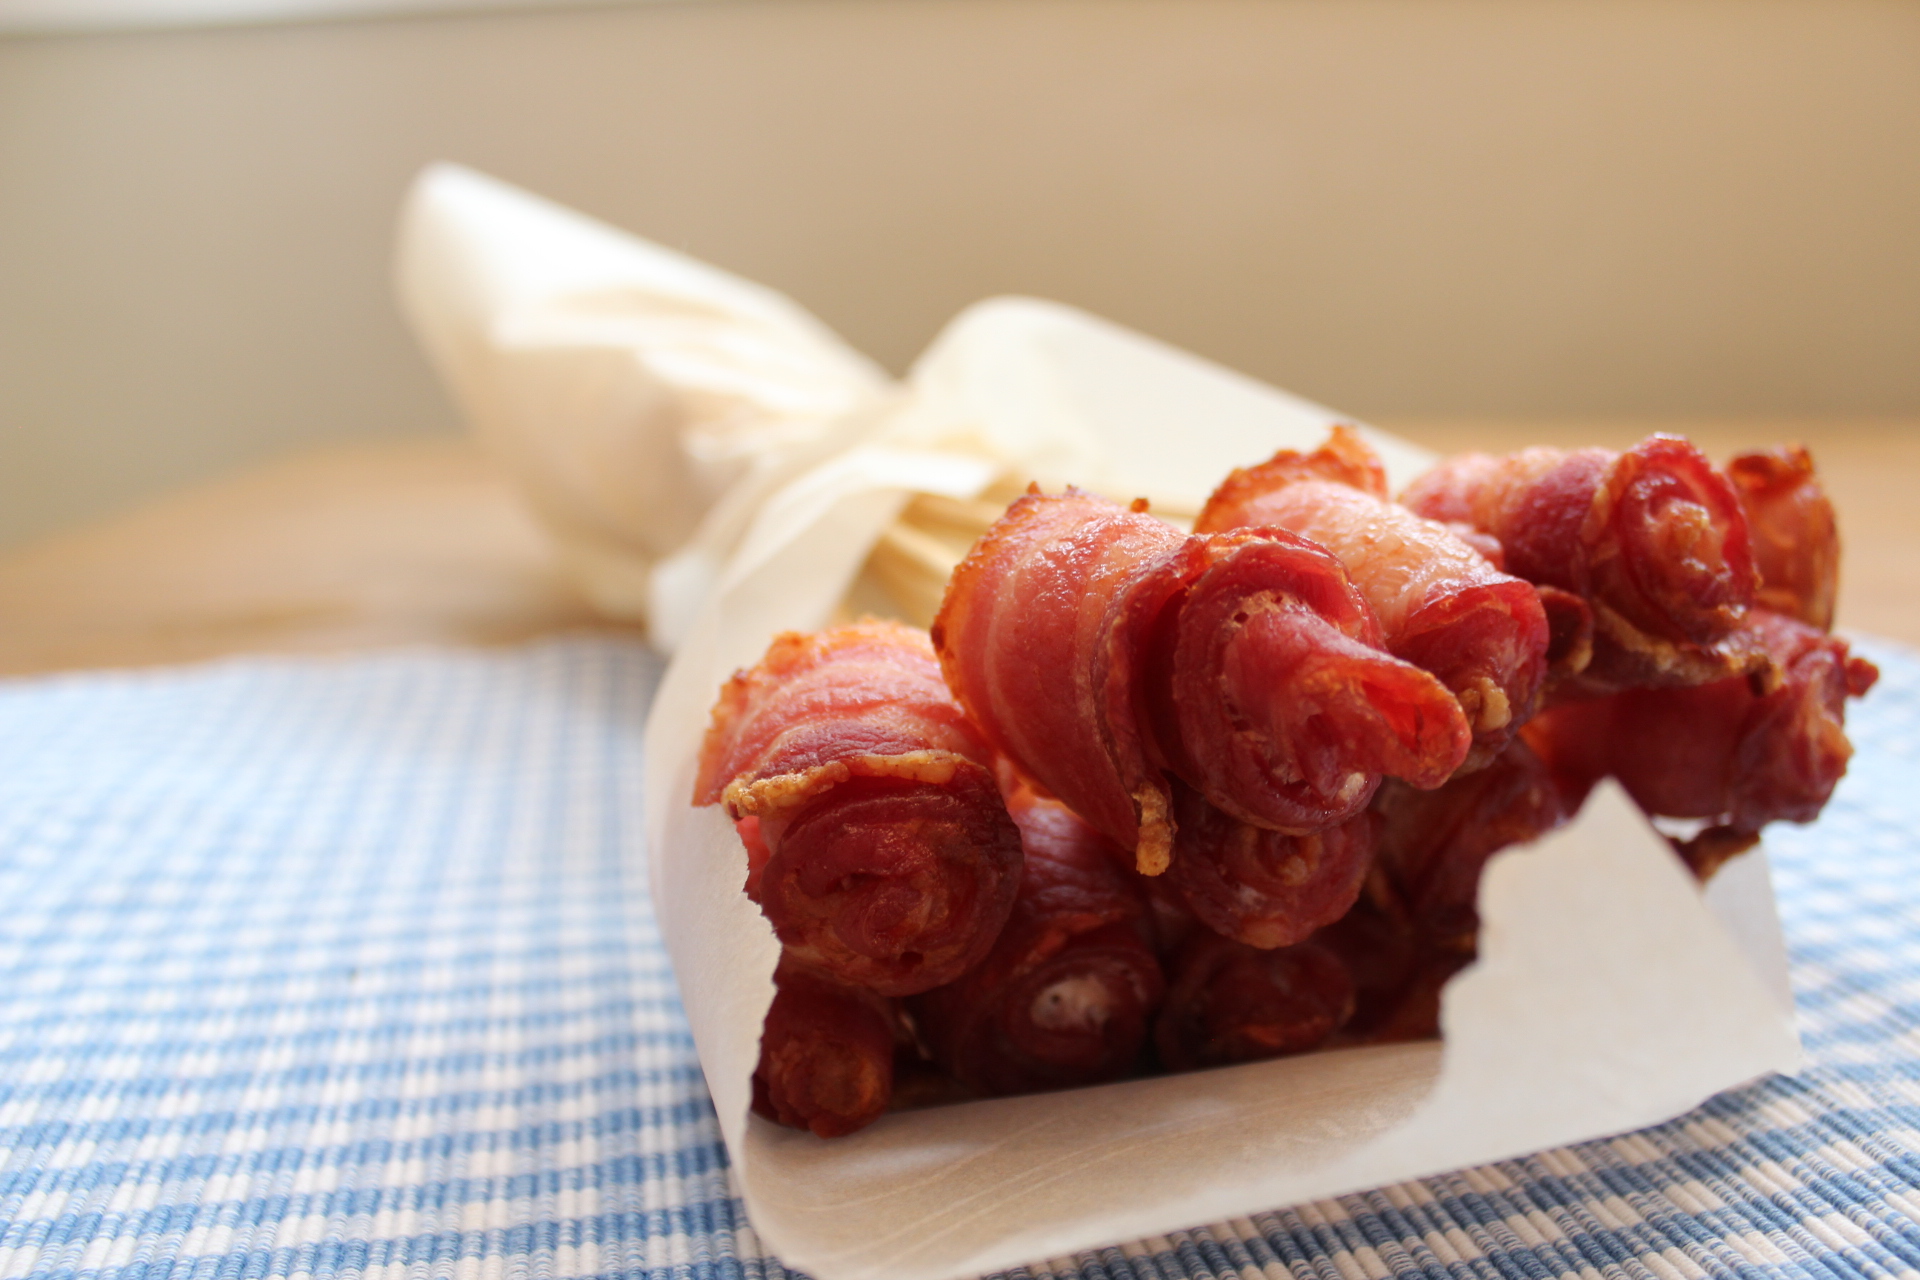 Easy Homemade Bacon Roses - Health, Home, & Happiness1920 x 1280